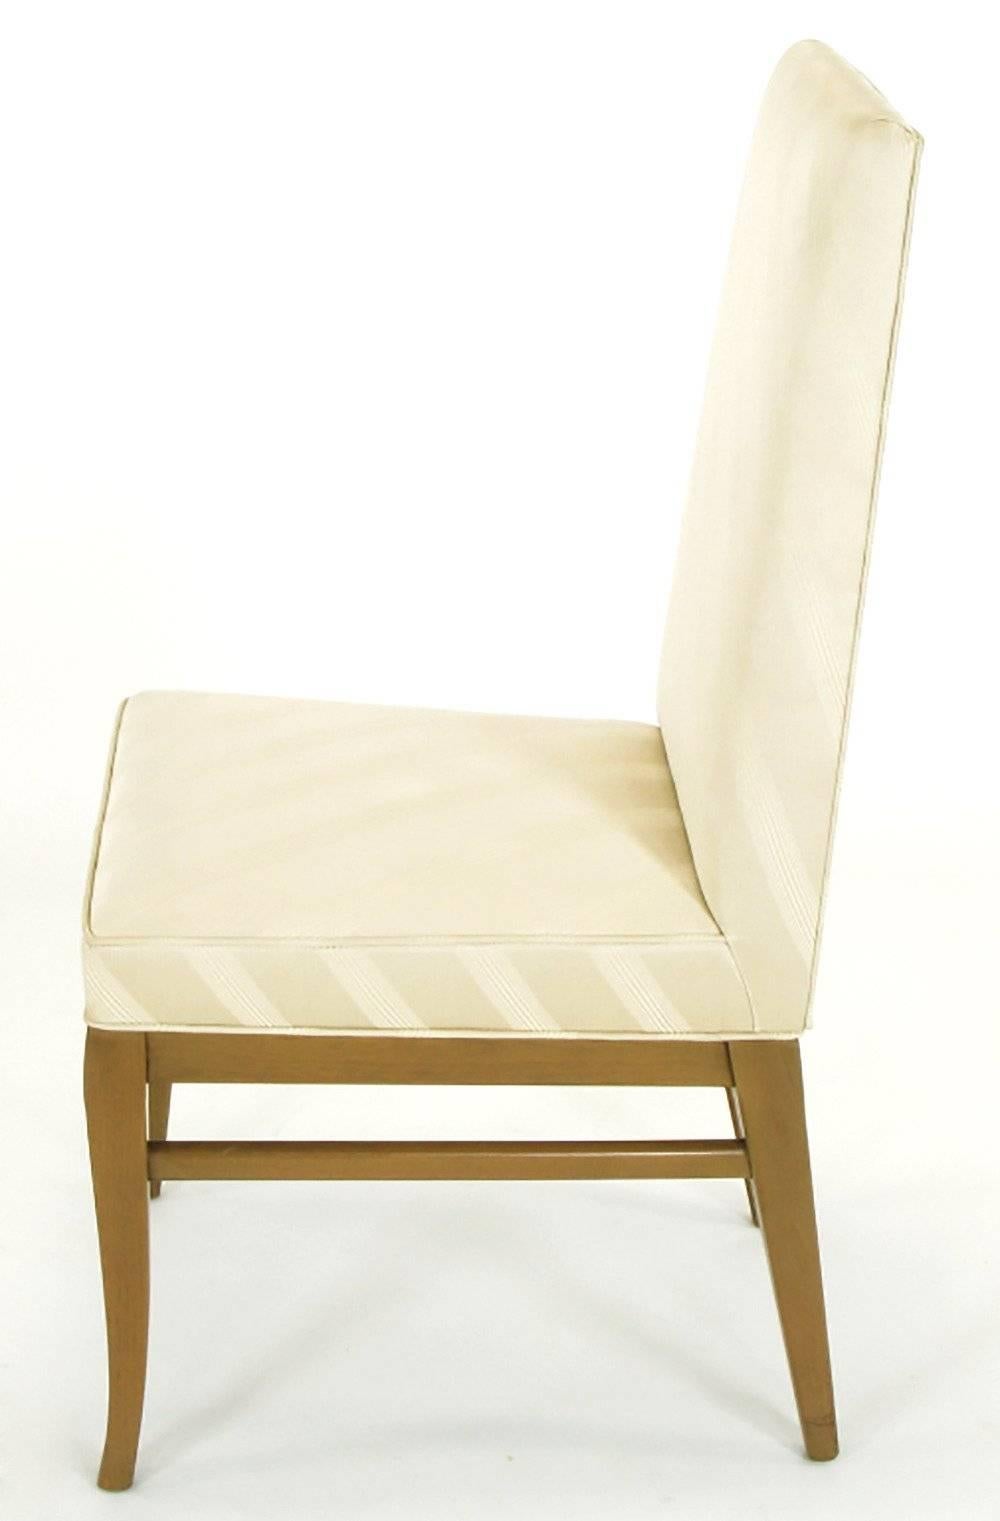 American Six Bleached Mahogany and Silk Upholstered Saber Leg Dining Chairs For Sale